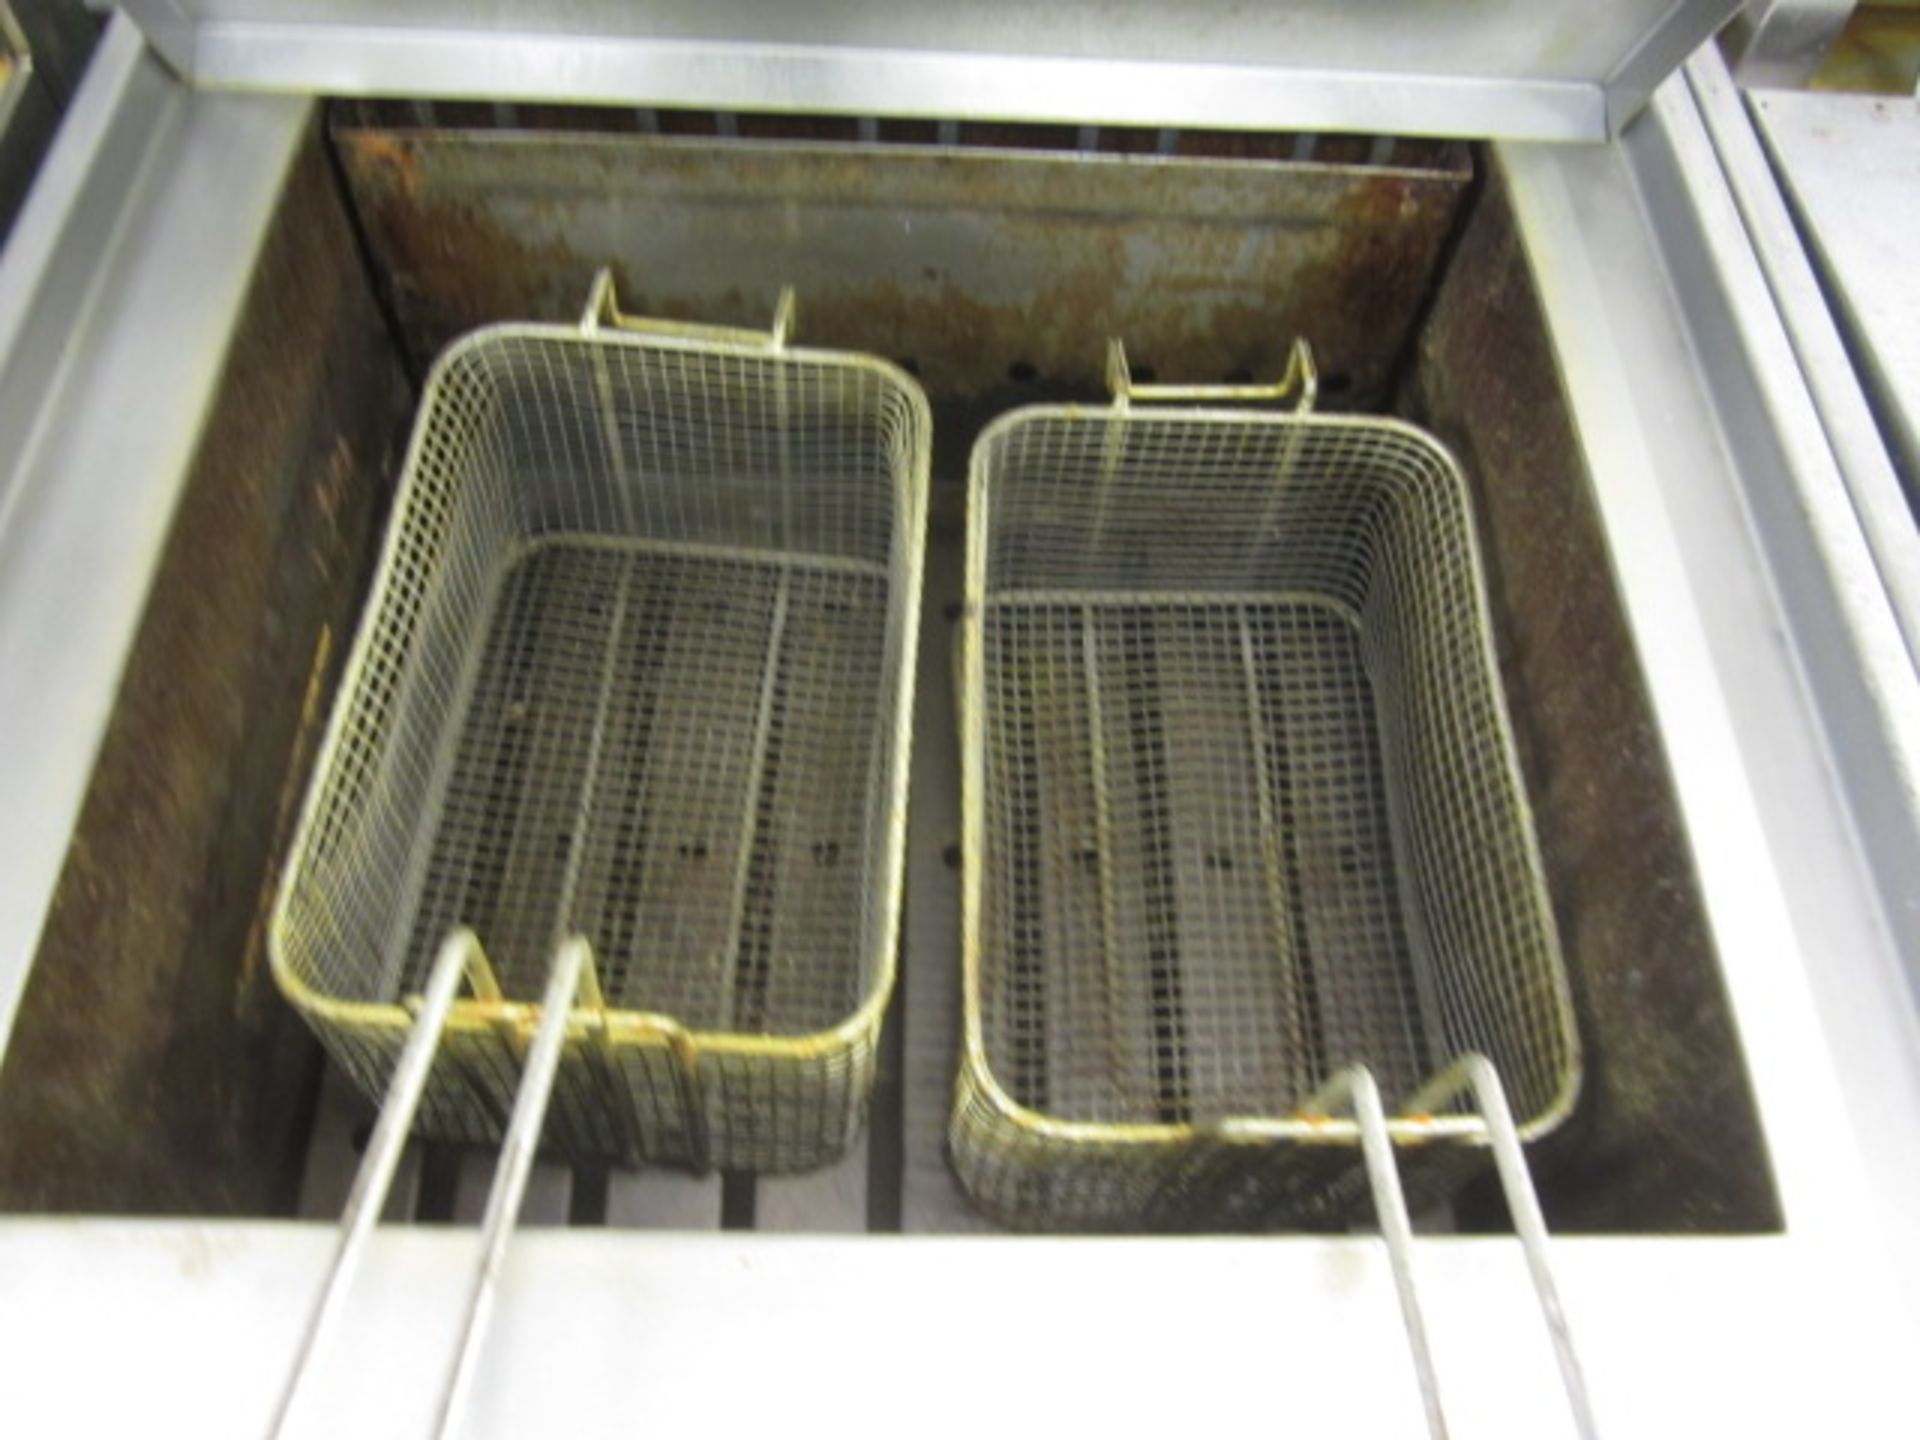 Unbadged electric stainless steel twin basket deep fat fryer, 600mm x 800mm x H950mm - Disconnection - Image 2 of 3